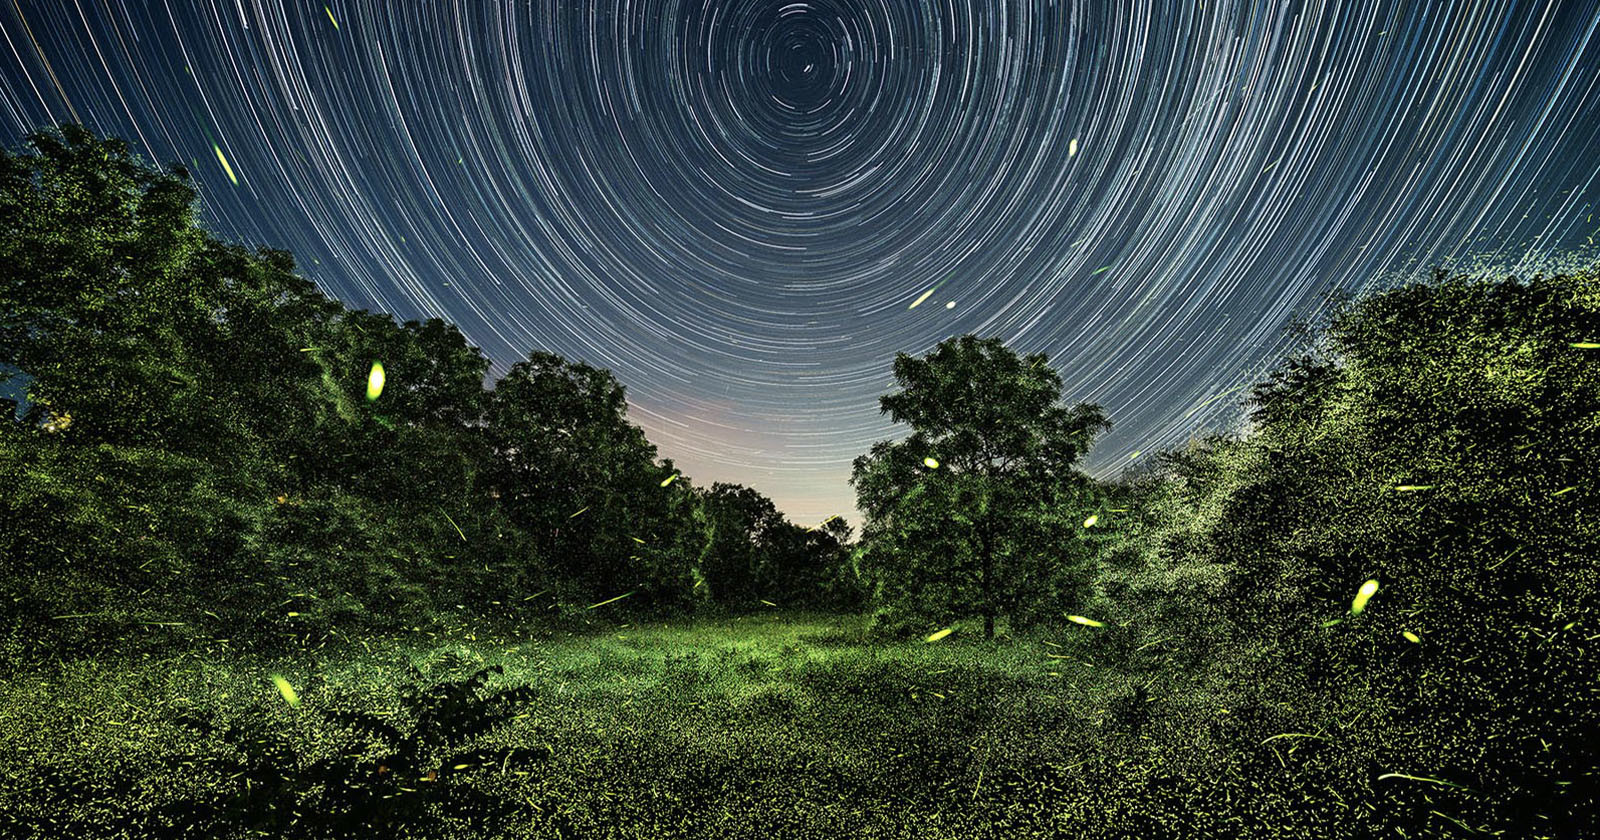 Magical Photos Shed New Light on How Fireflies Interact with the World